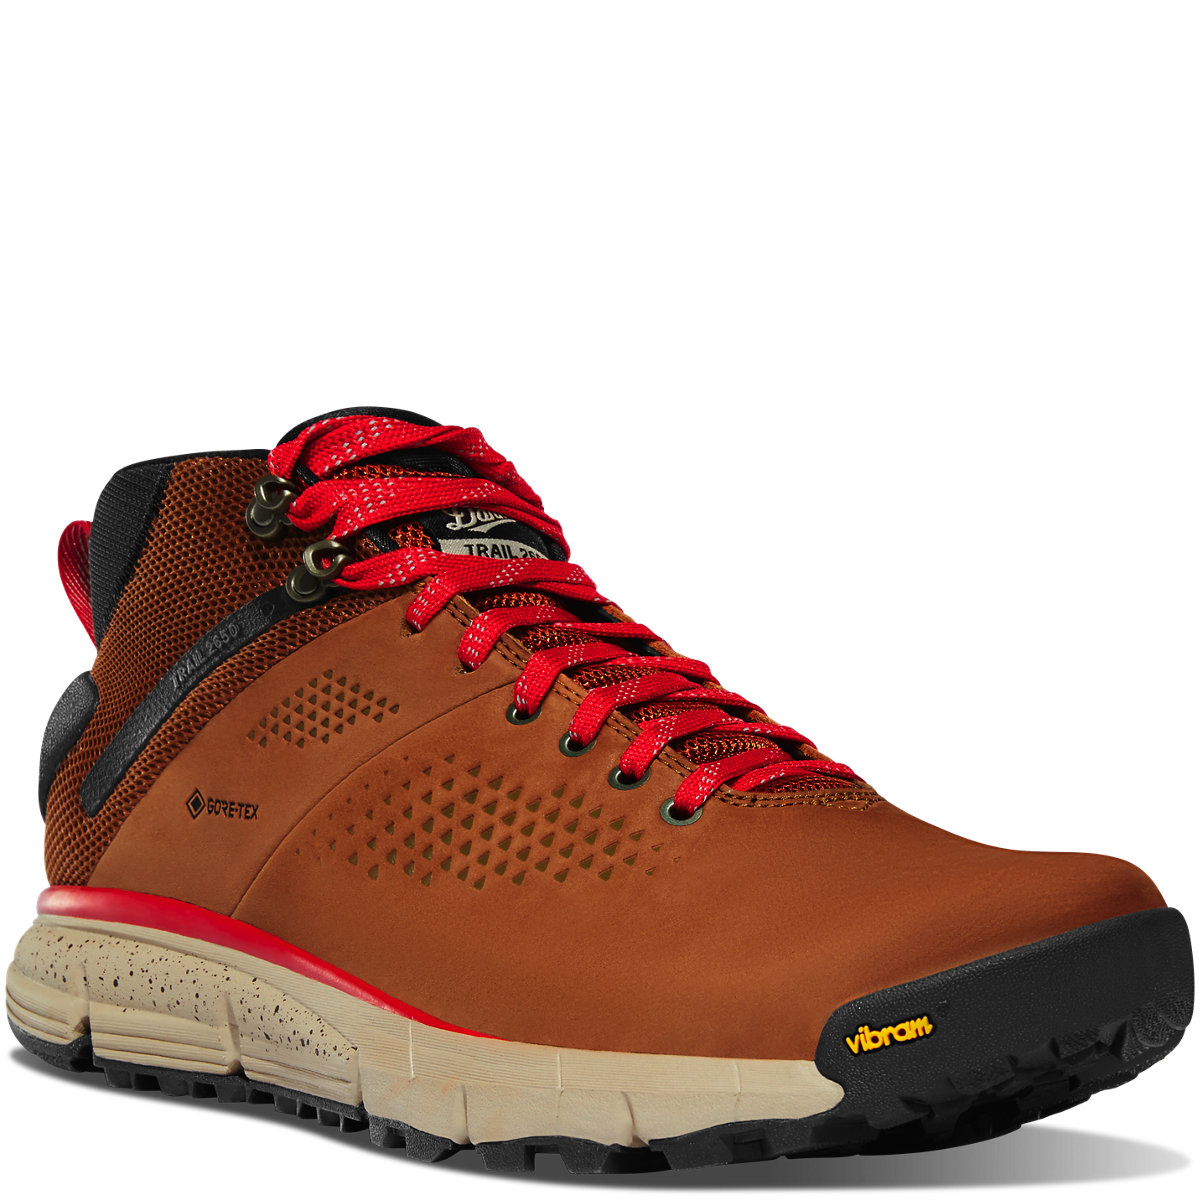 Trail 2650 Mid 4" Brown/Red GTX